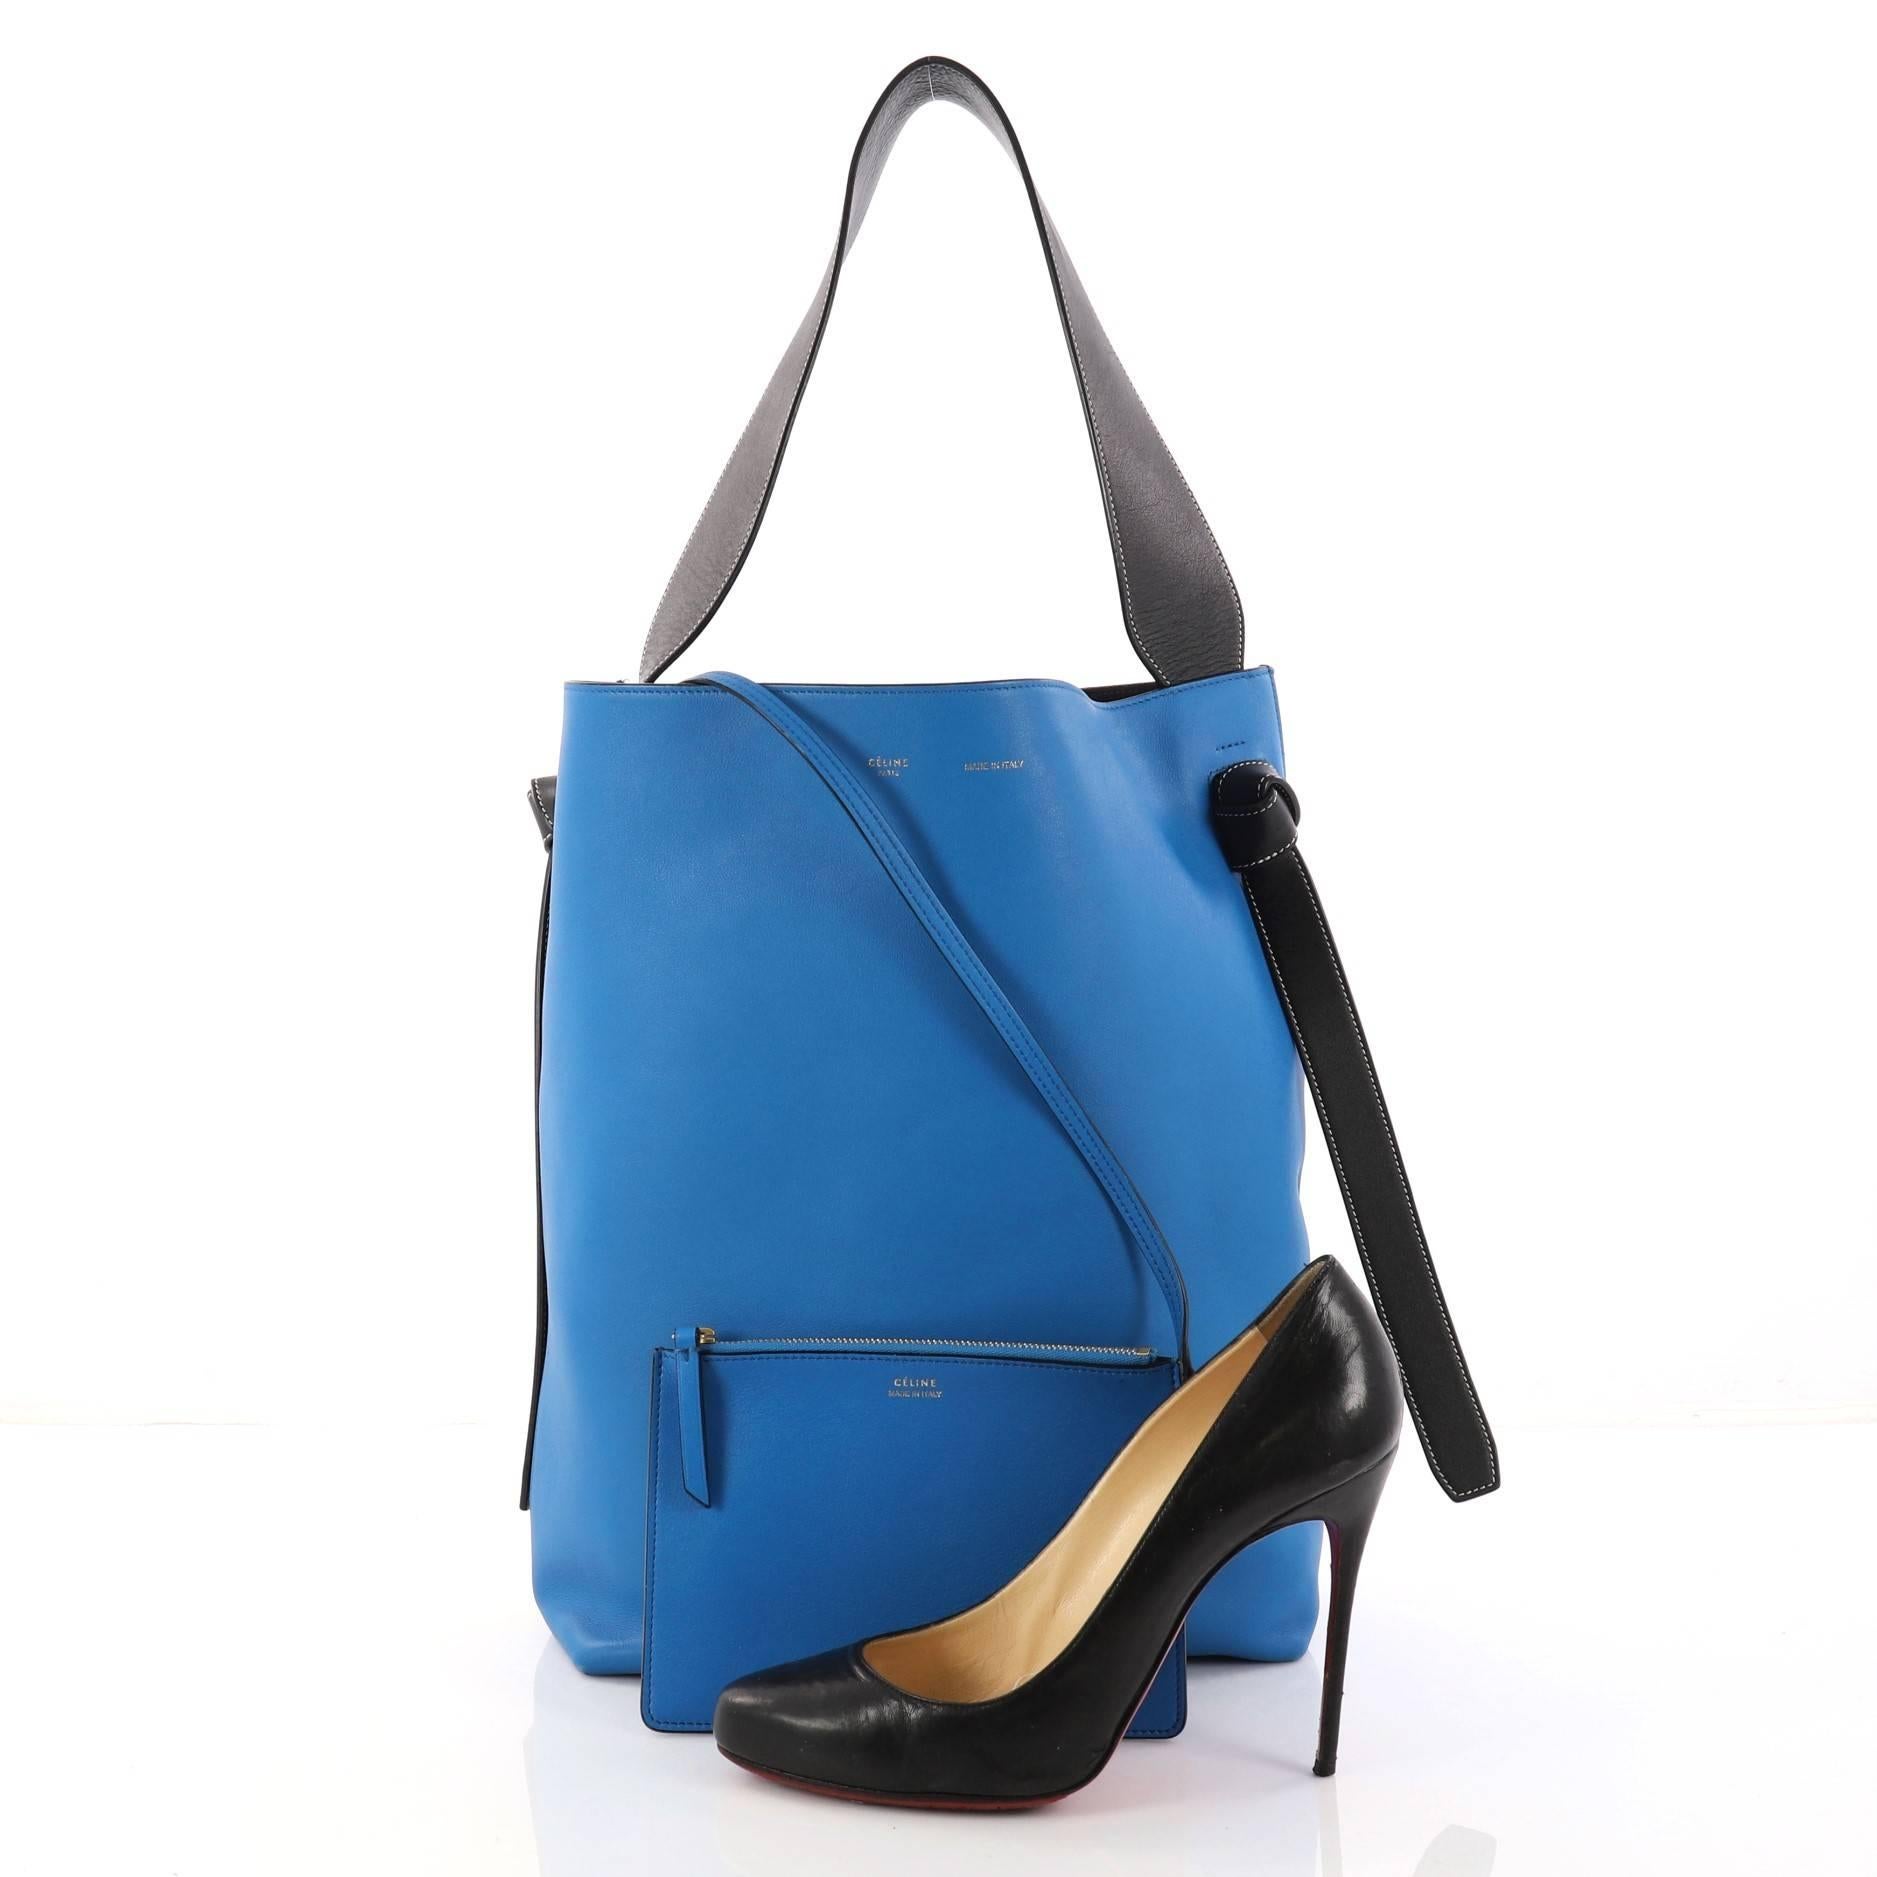 This authentic Celine Twisted Cabas Tote Calfskin Small is a youthful accessory made for everyday excursions. Crafted from blue and teal calfskin leather, this fresh tote features black leather looping shoulder strap with knot ends, stamped logo at